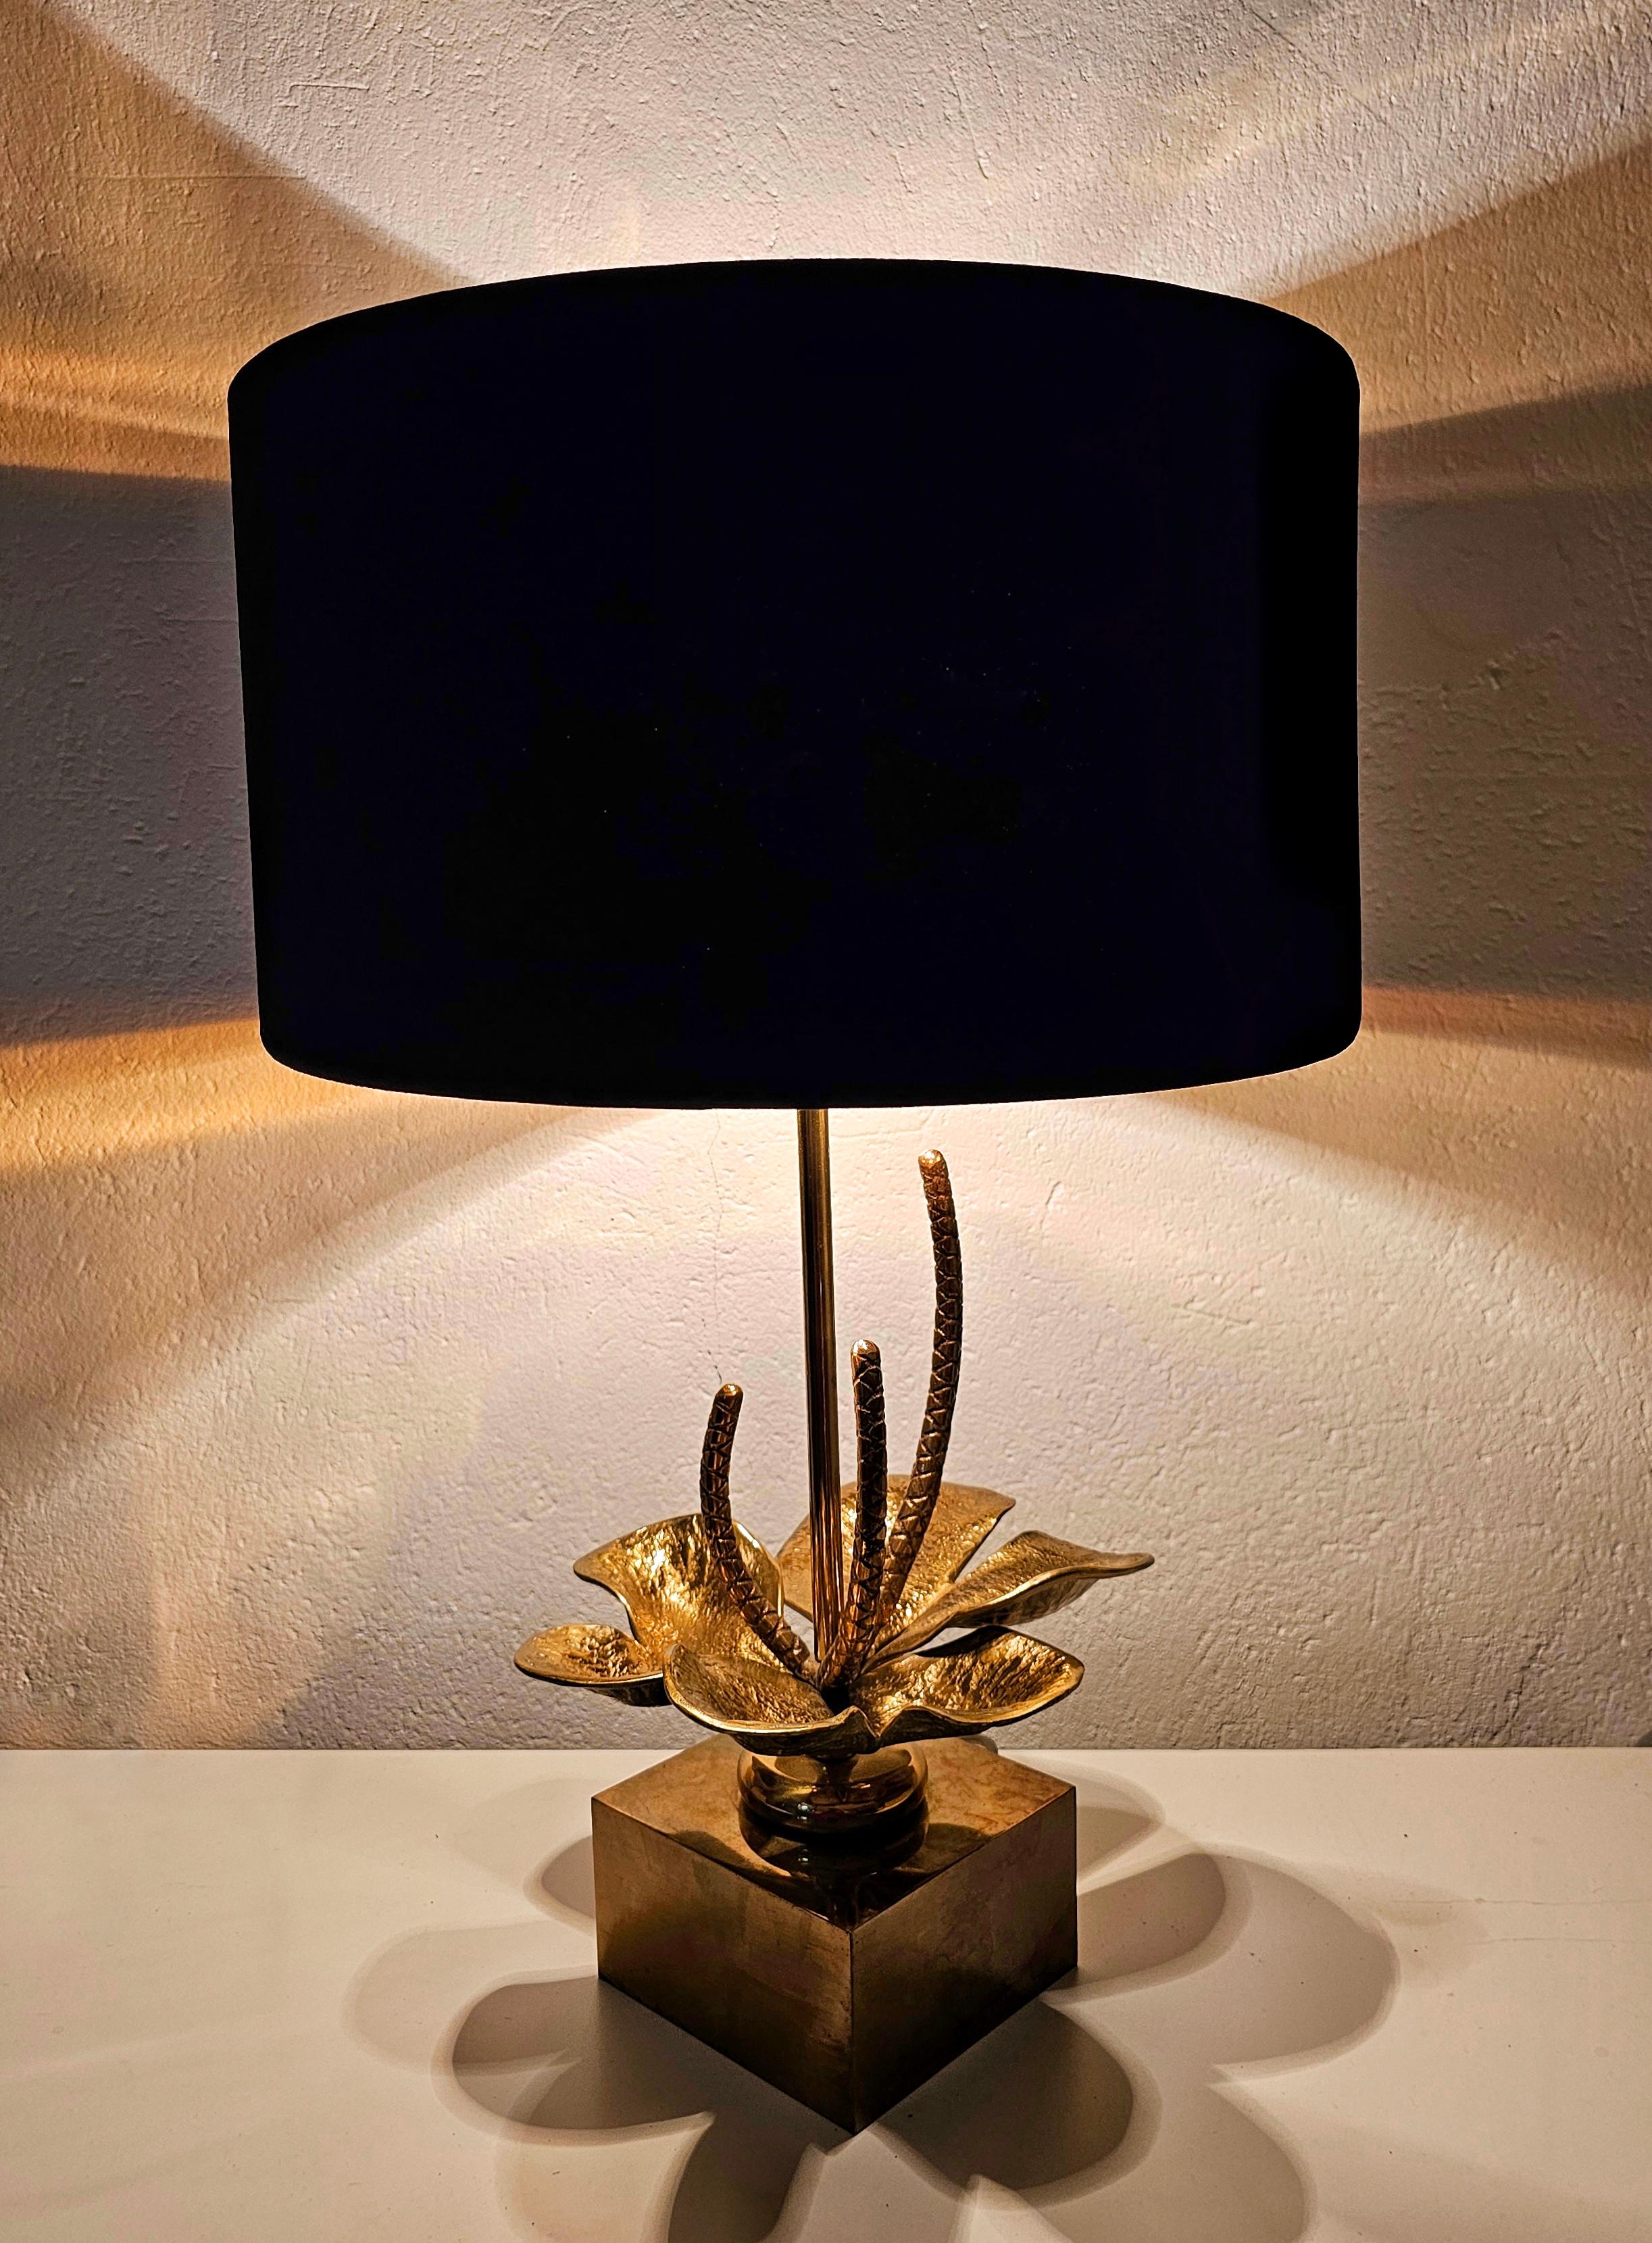 In this listing you will find an eye-catching Mid Century Modern table lamp featuring Nenuphar Lilly done in bronze and brass and manufactured by Maison Charles. It features black velvet shade with golden sheet inside which provides gorgeous golden